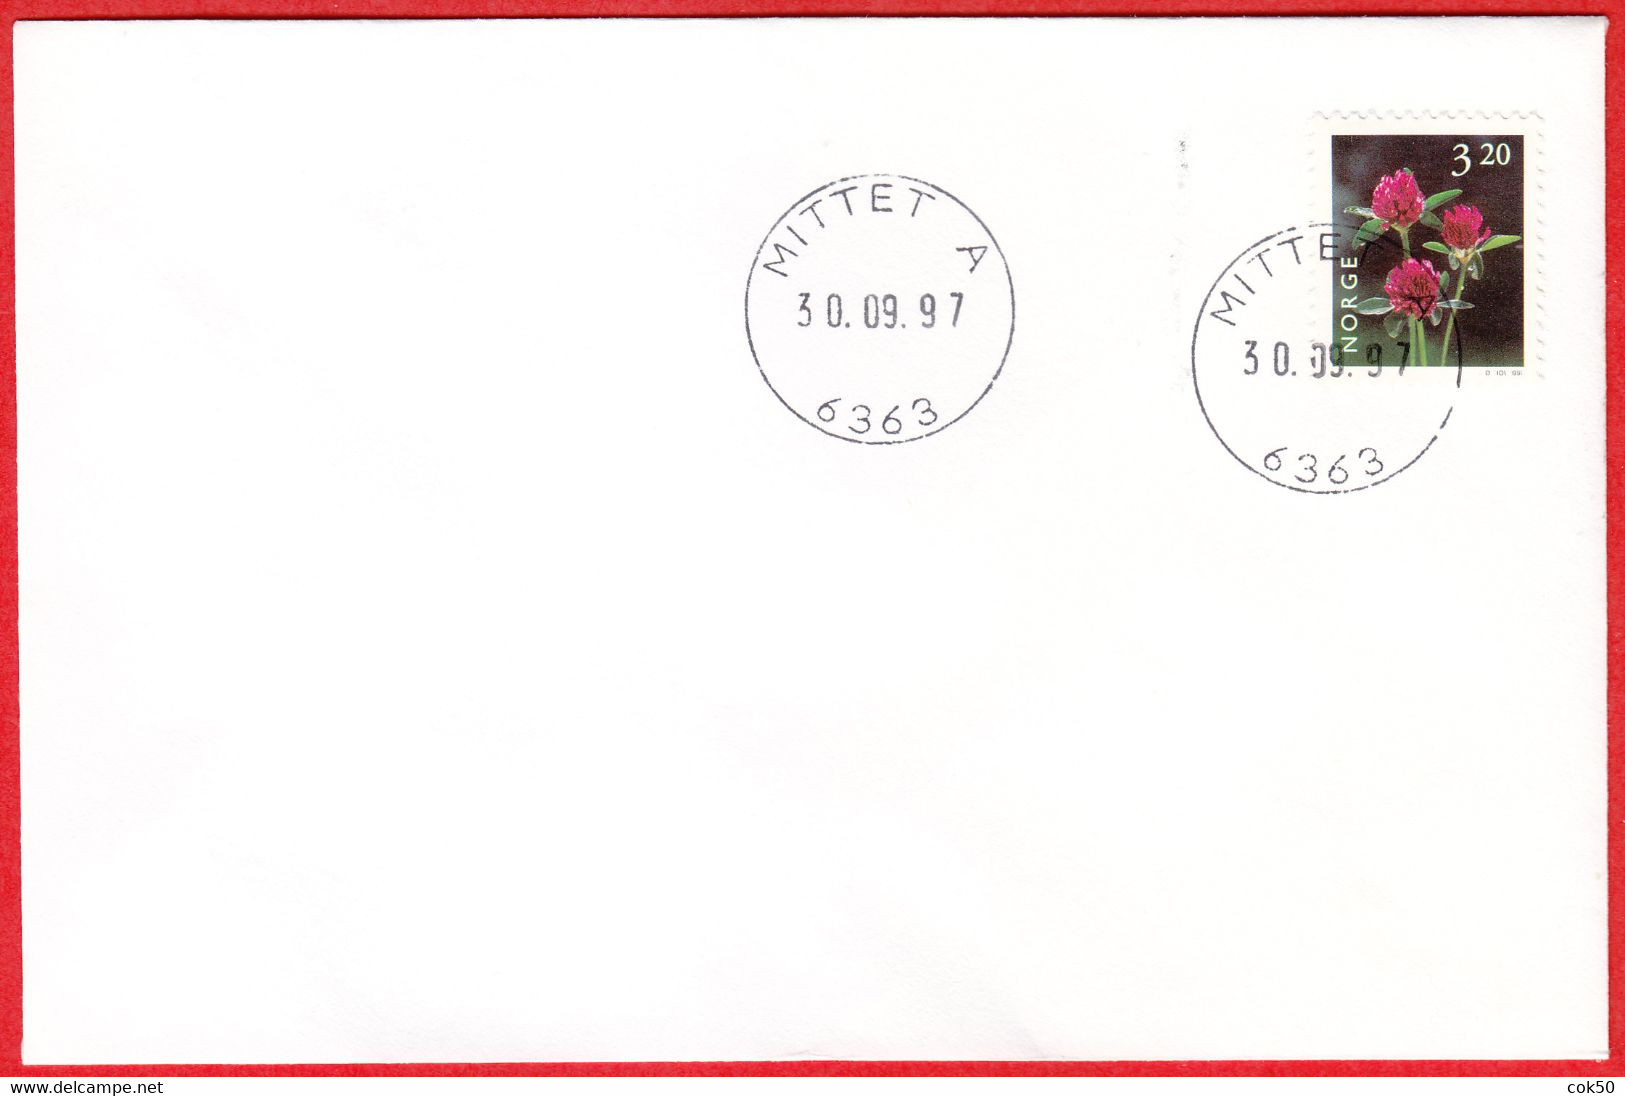 NORWAY -  6363 MITTET A (Møre & Romsdal County) - Last Day/postoffice Closed On 1997.09.30 - Emissioni Locali